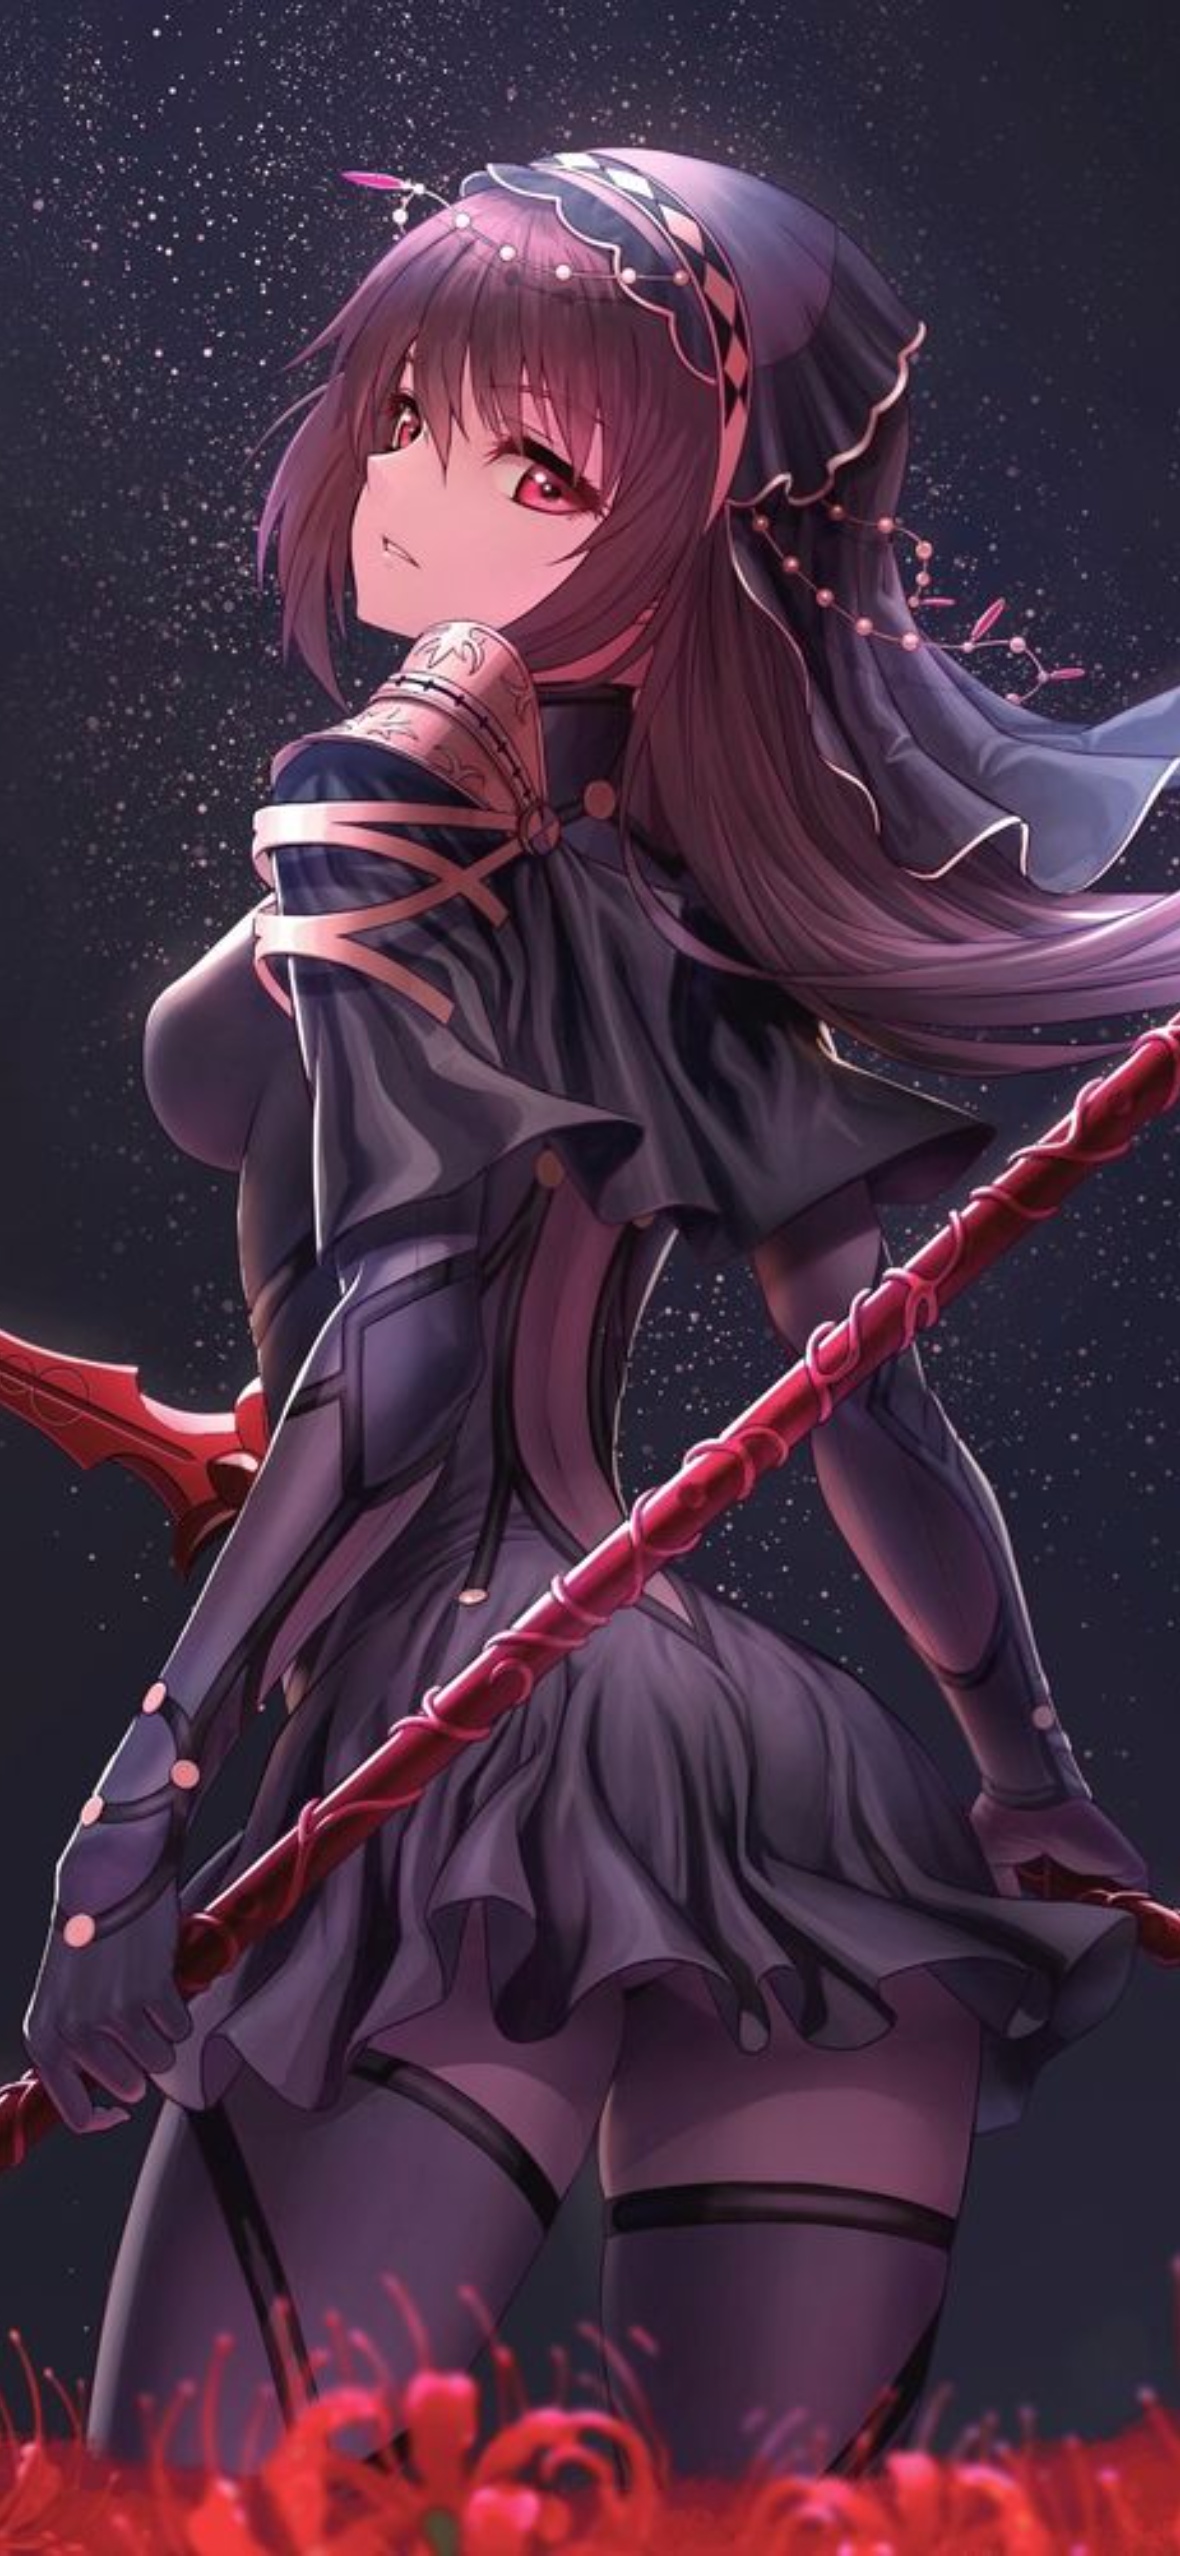 Cool Anime iPhone Wallpaper